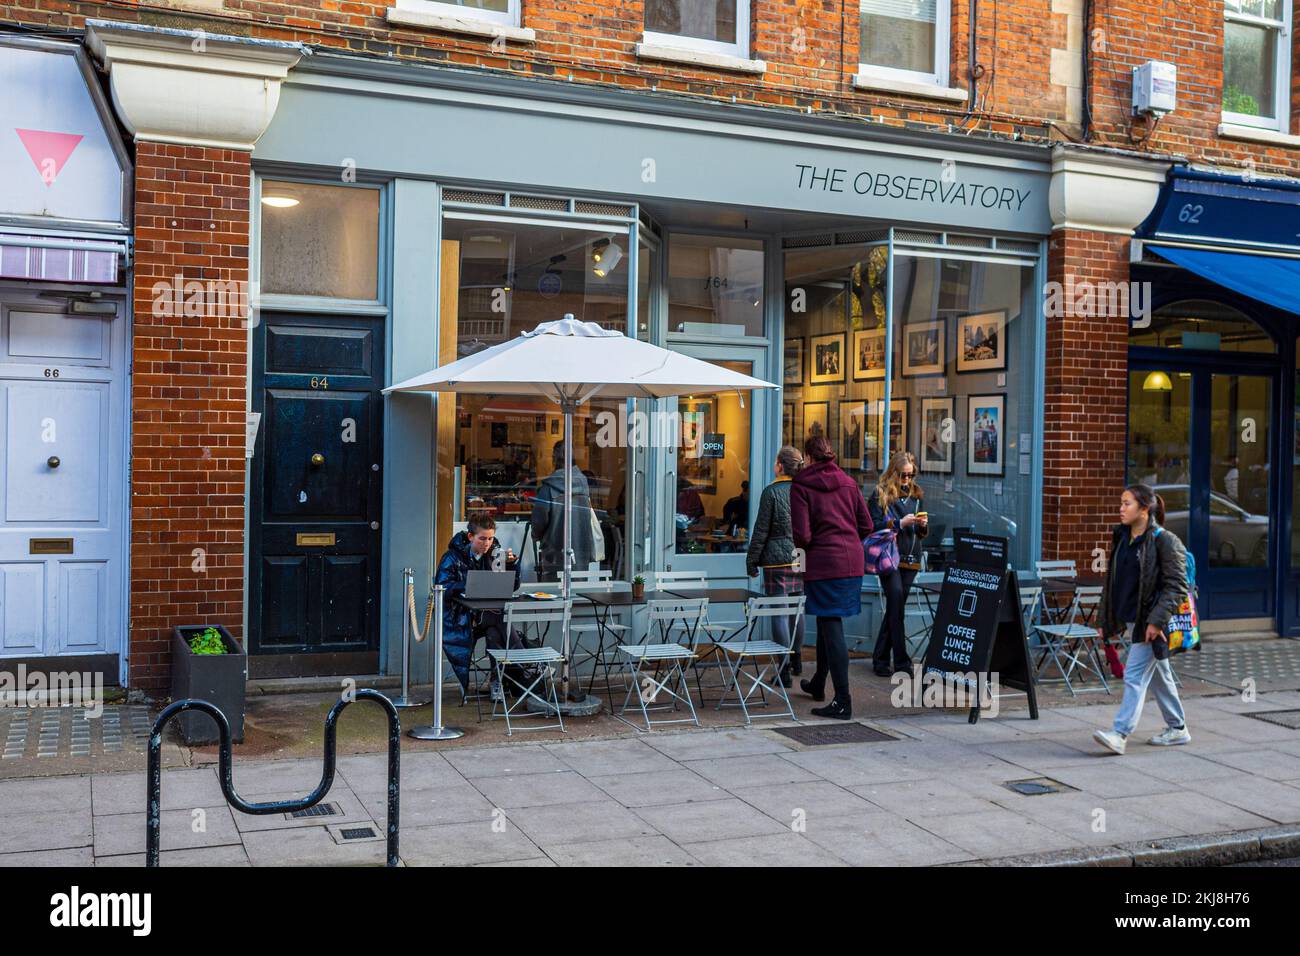 The Observatory Photography Gallery & Cafe at 64 Marchmont Street, Bloomsbury London. Stock Photo